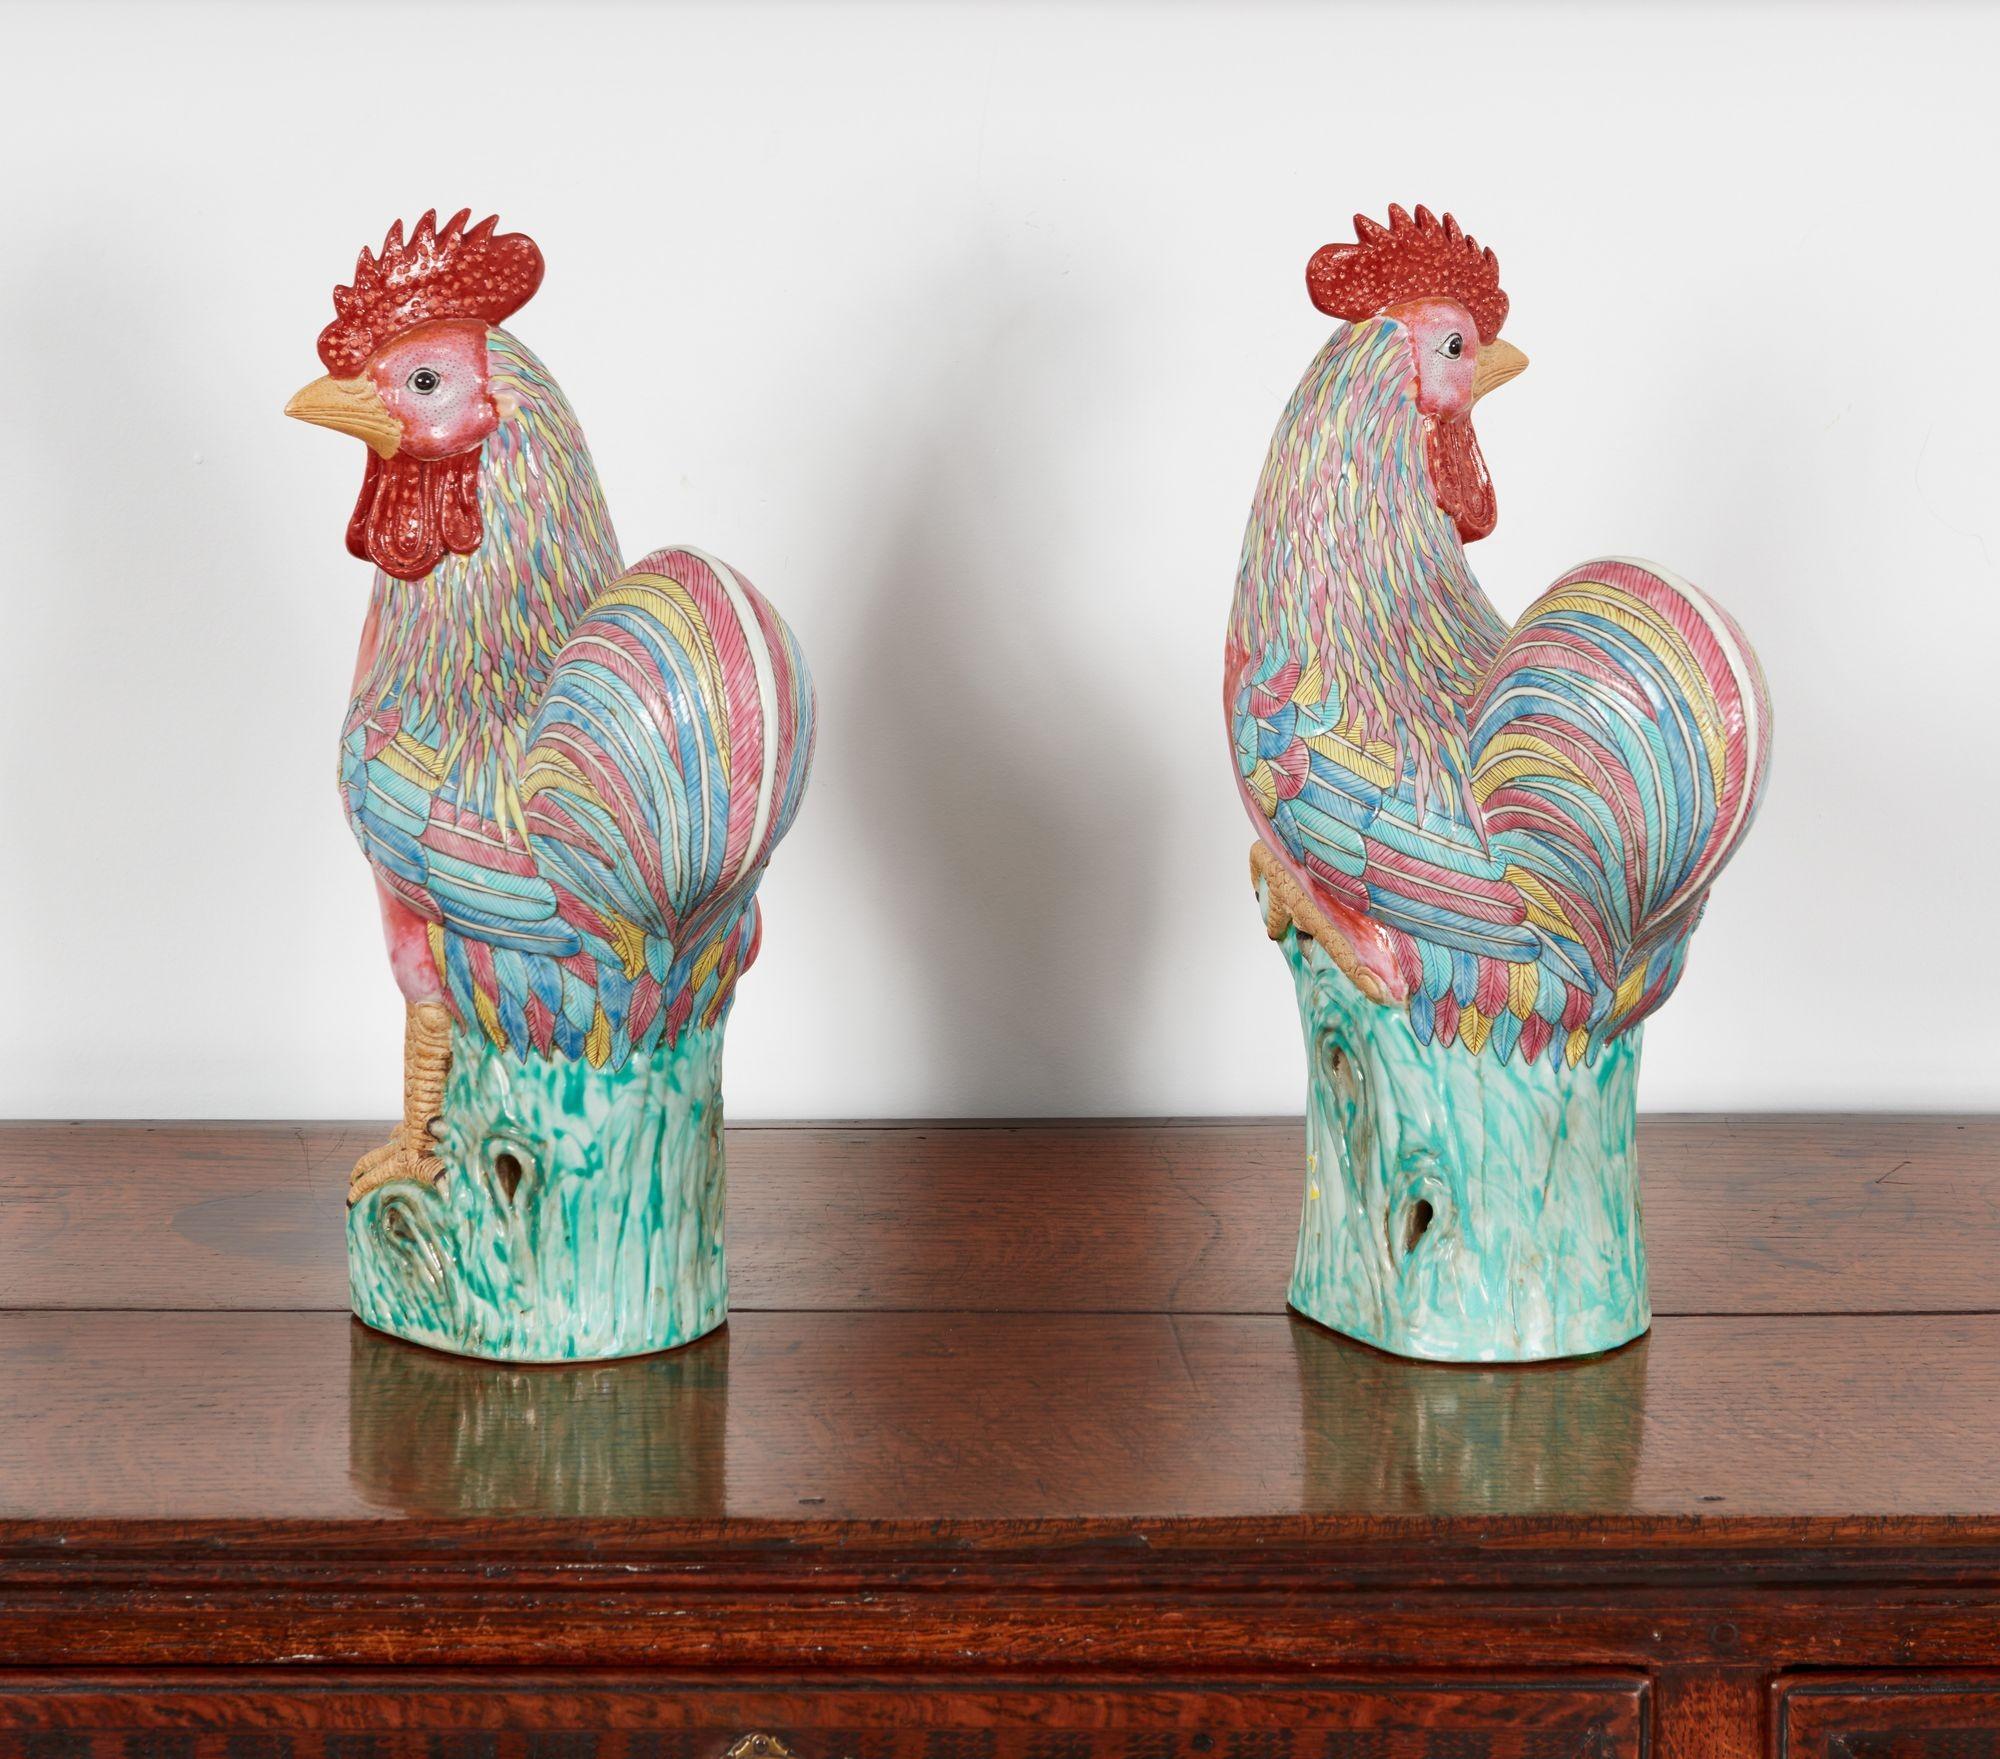 A pair of Chinese export glazed ceramic roosters with polychrome plumage in pinks, greens and orange with and striking red crowns and wattles, perched on weathered green striated tree stumps.